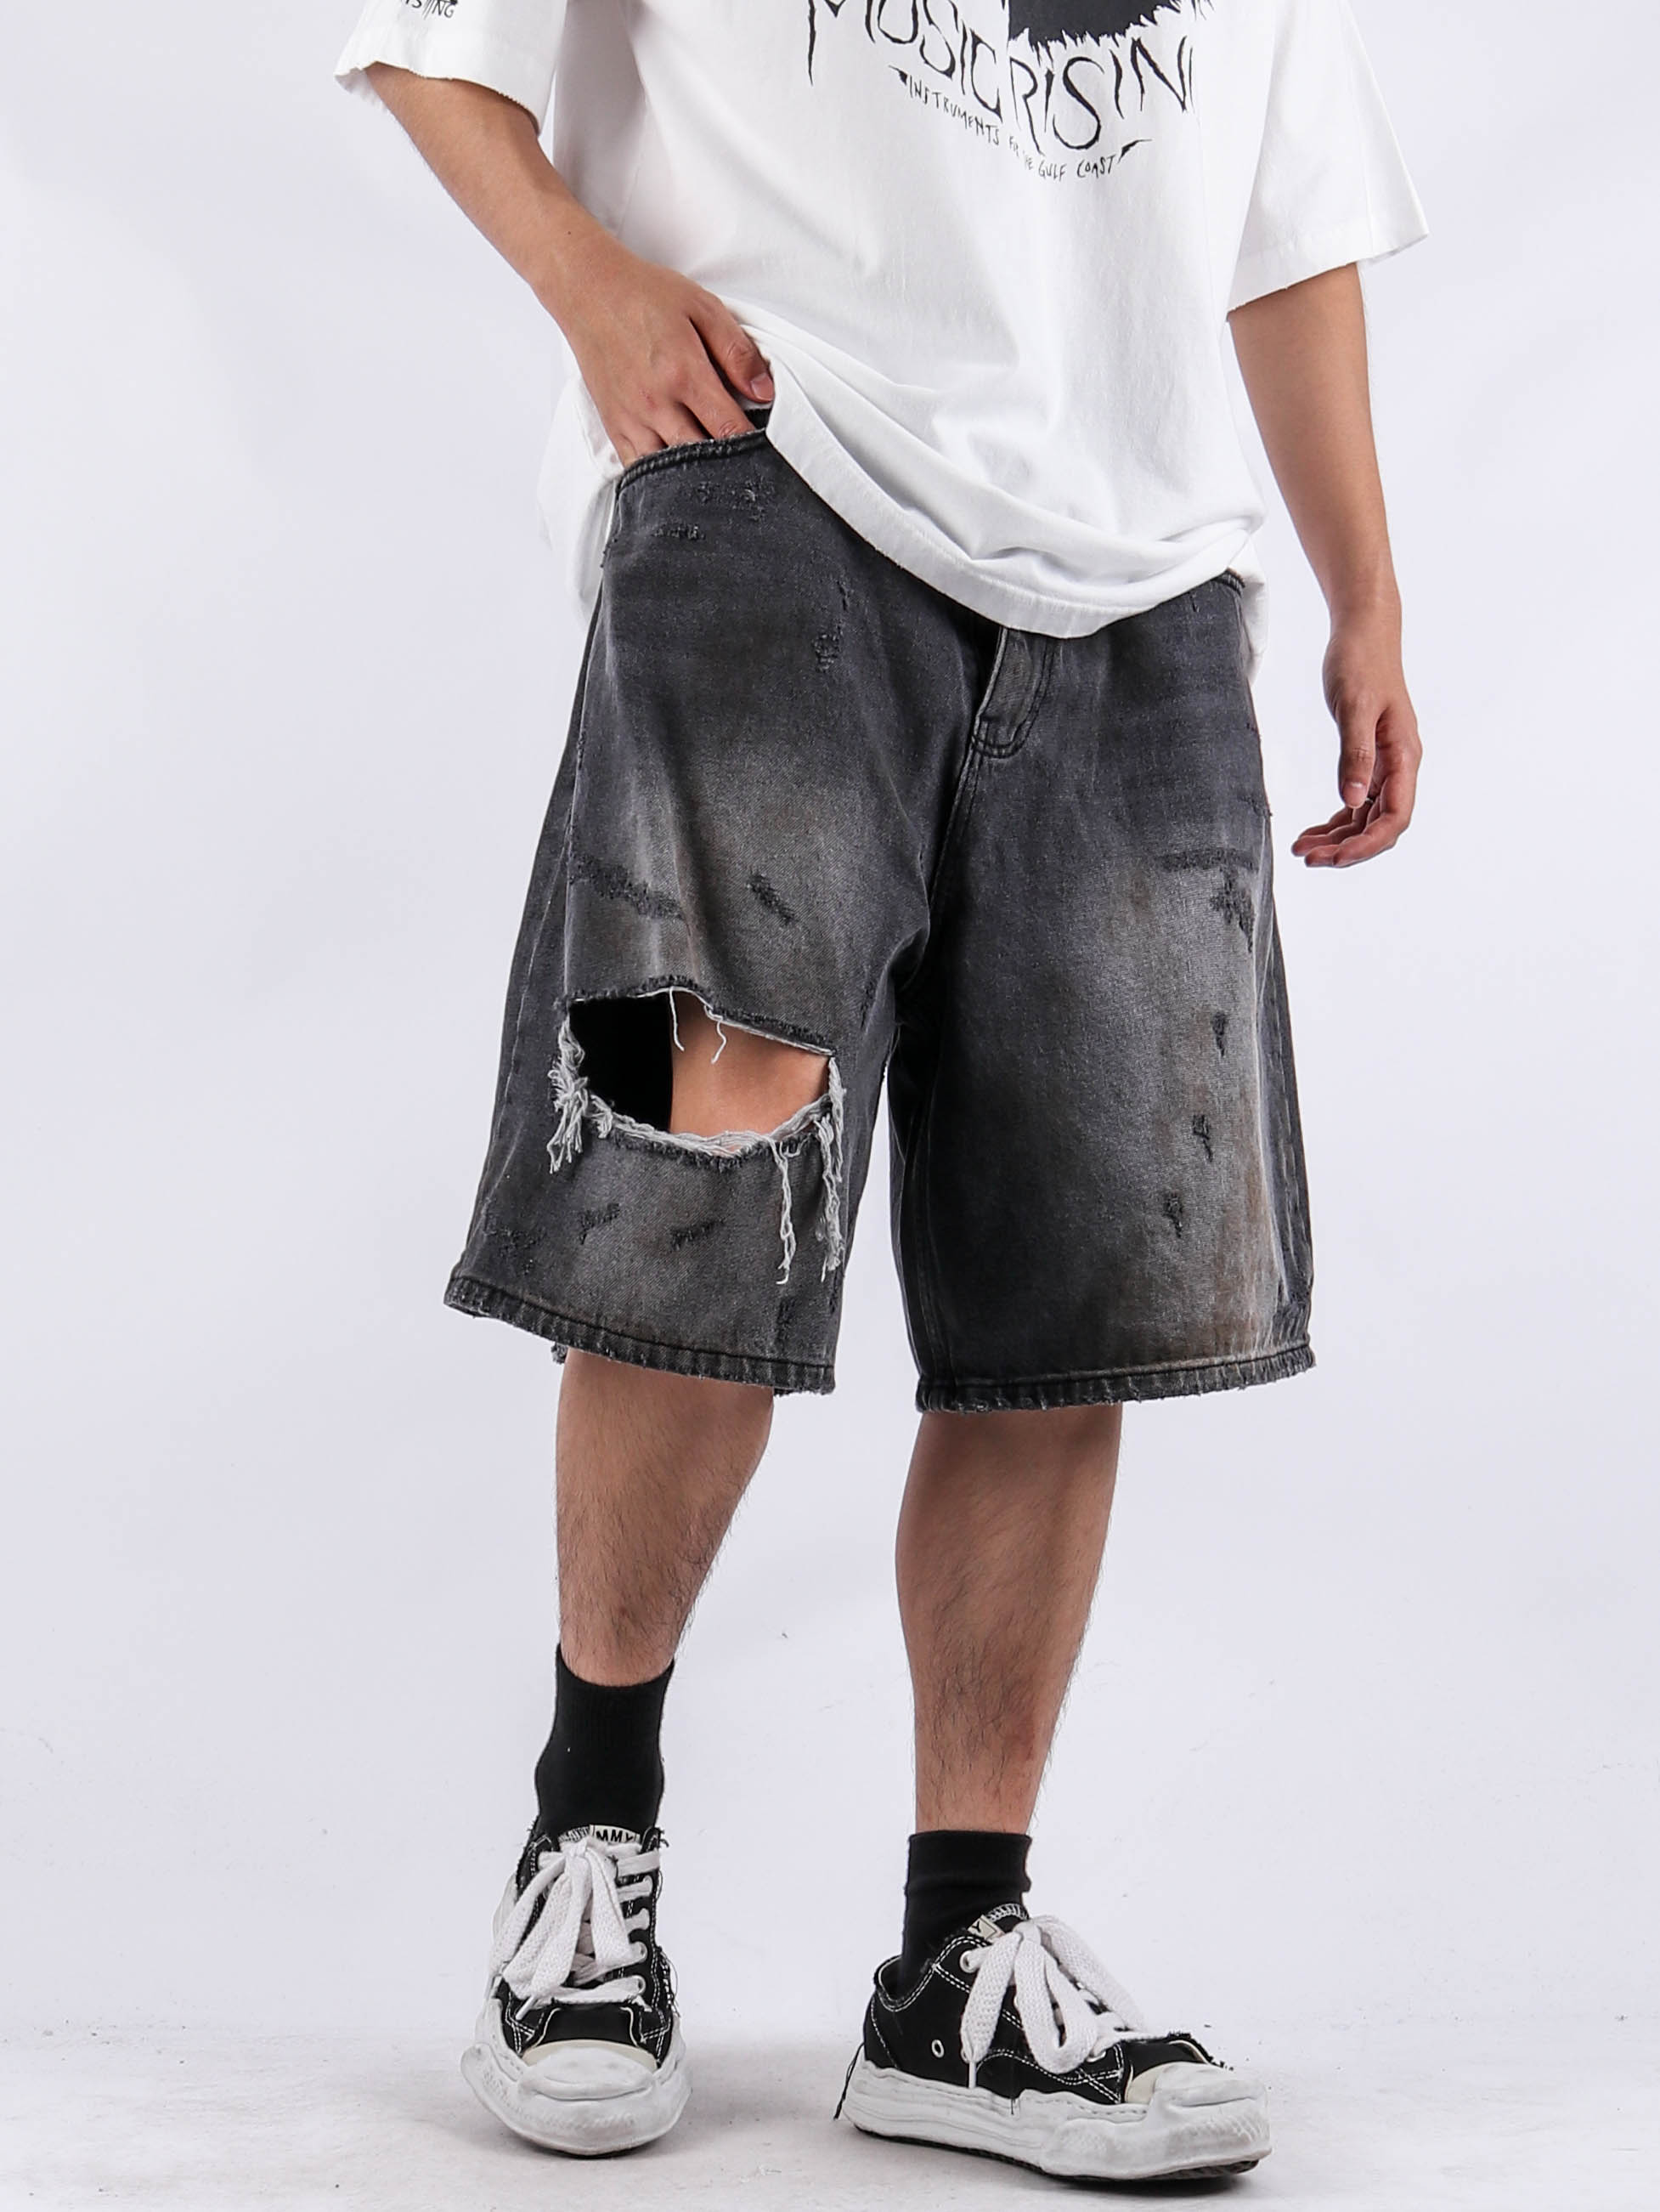 justyoung-AC Black Destroyed Shorts♡韓國男裝褲子